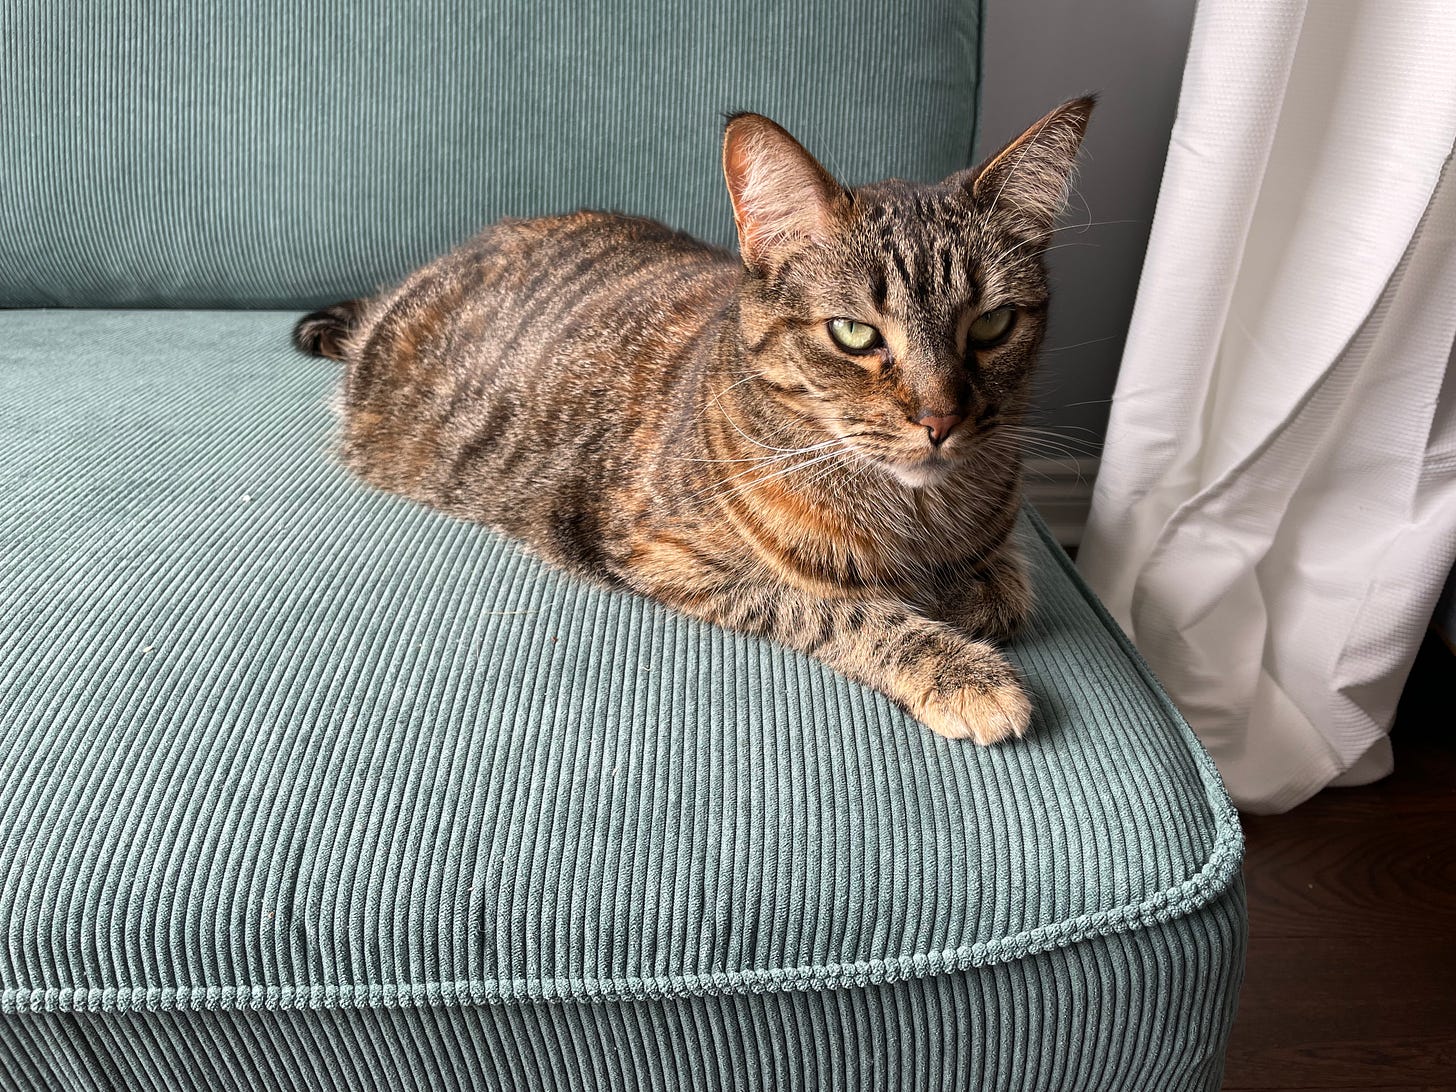 A beautiful but unimpressed-looking golden brown tabby cat sits on a blue-green corduroy sofa.